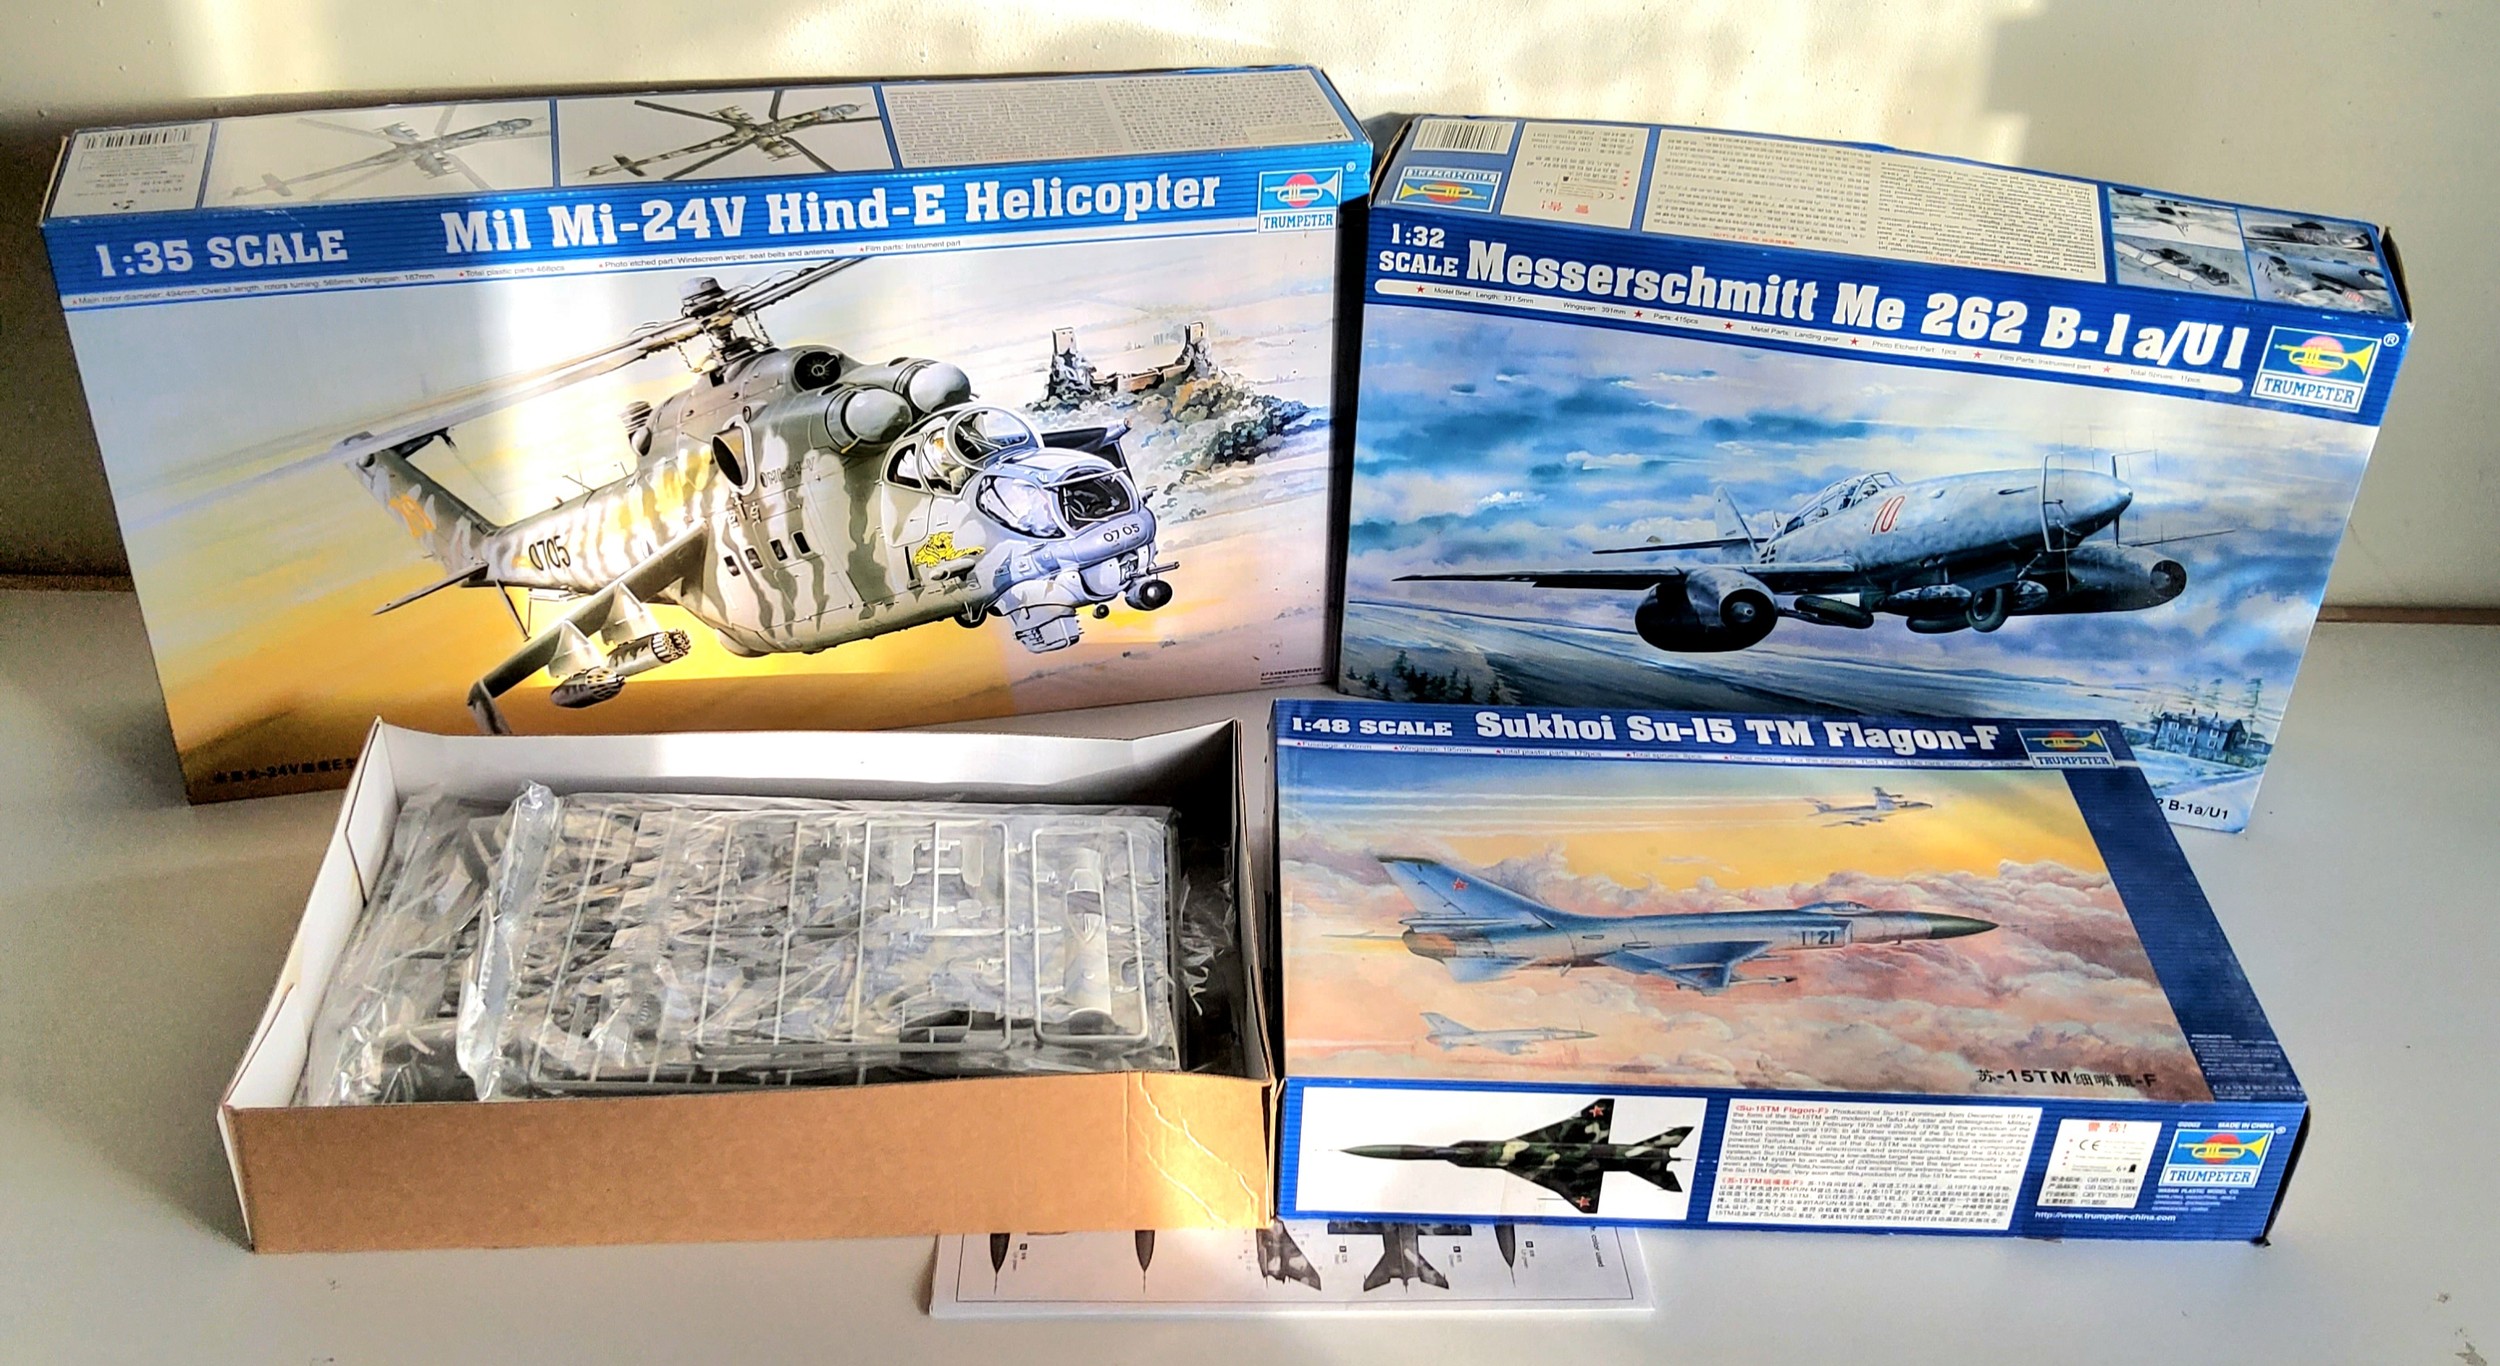 Three Boxed Trumpeter Model Aircraft Kits, to include 05103 1/35 Mil Mi-24V Hind-E Helicopter, 02237